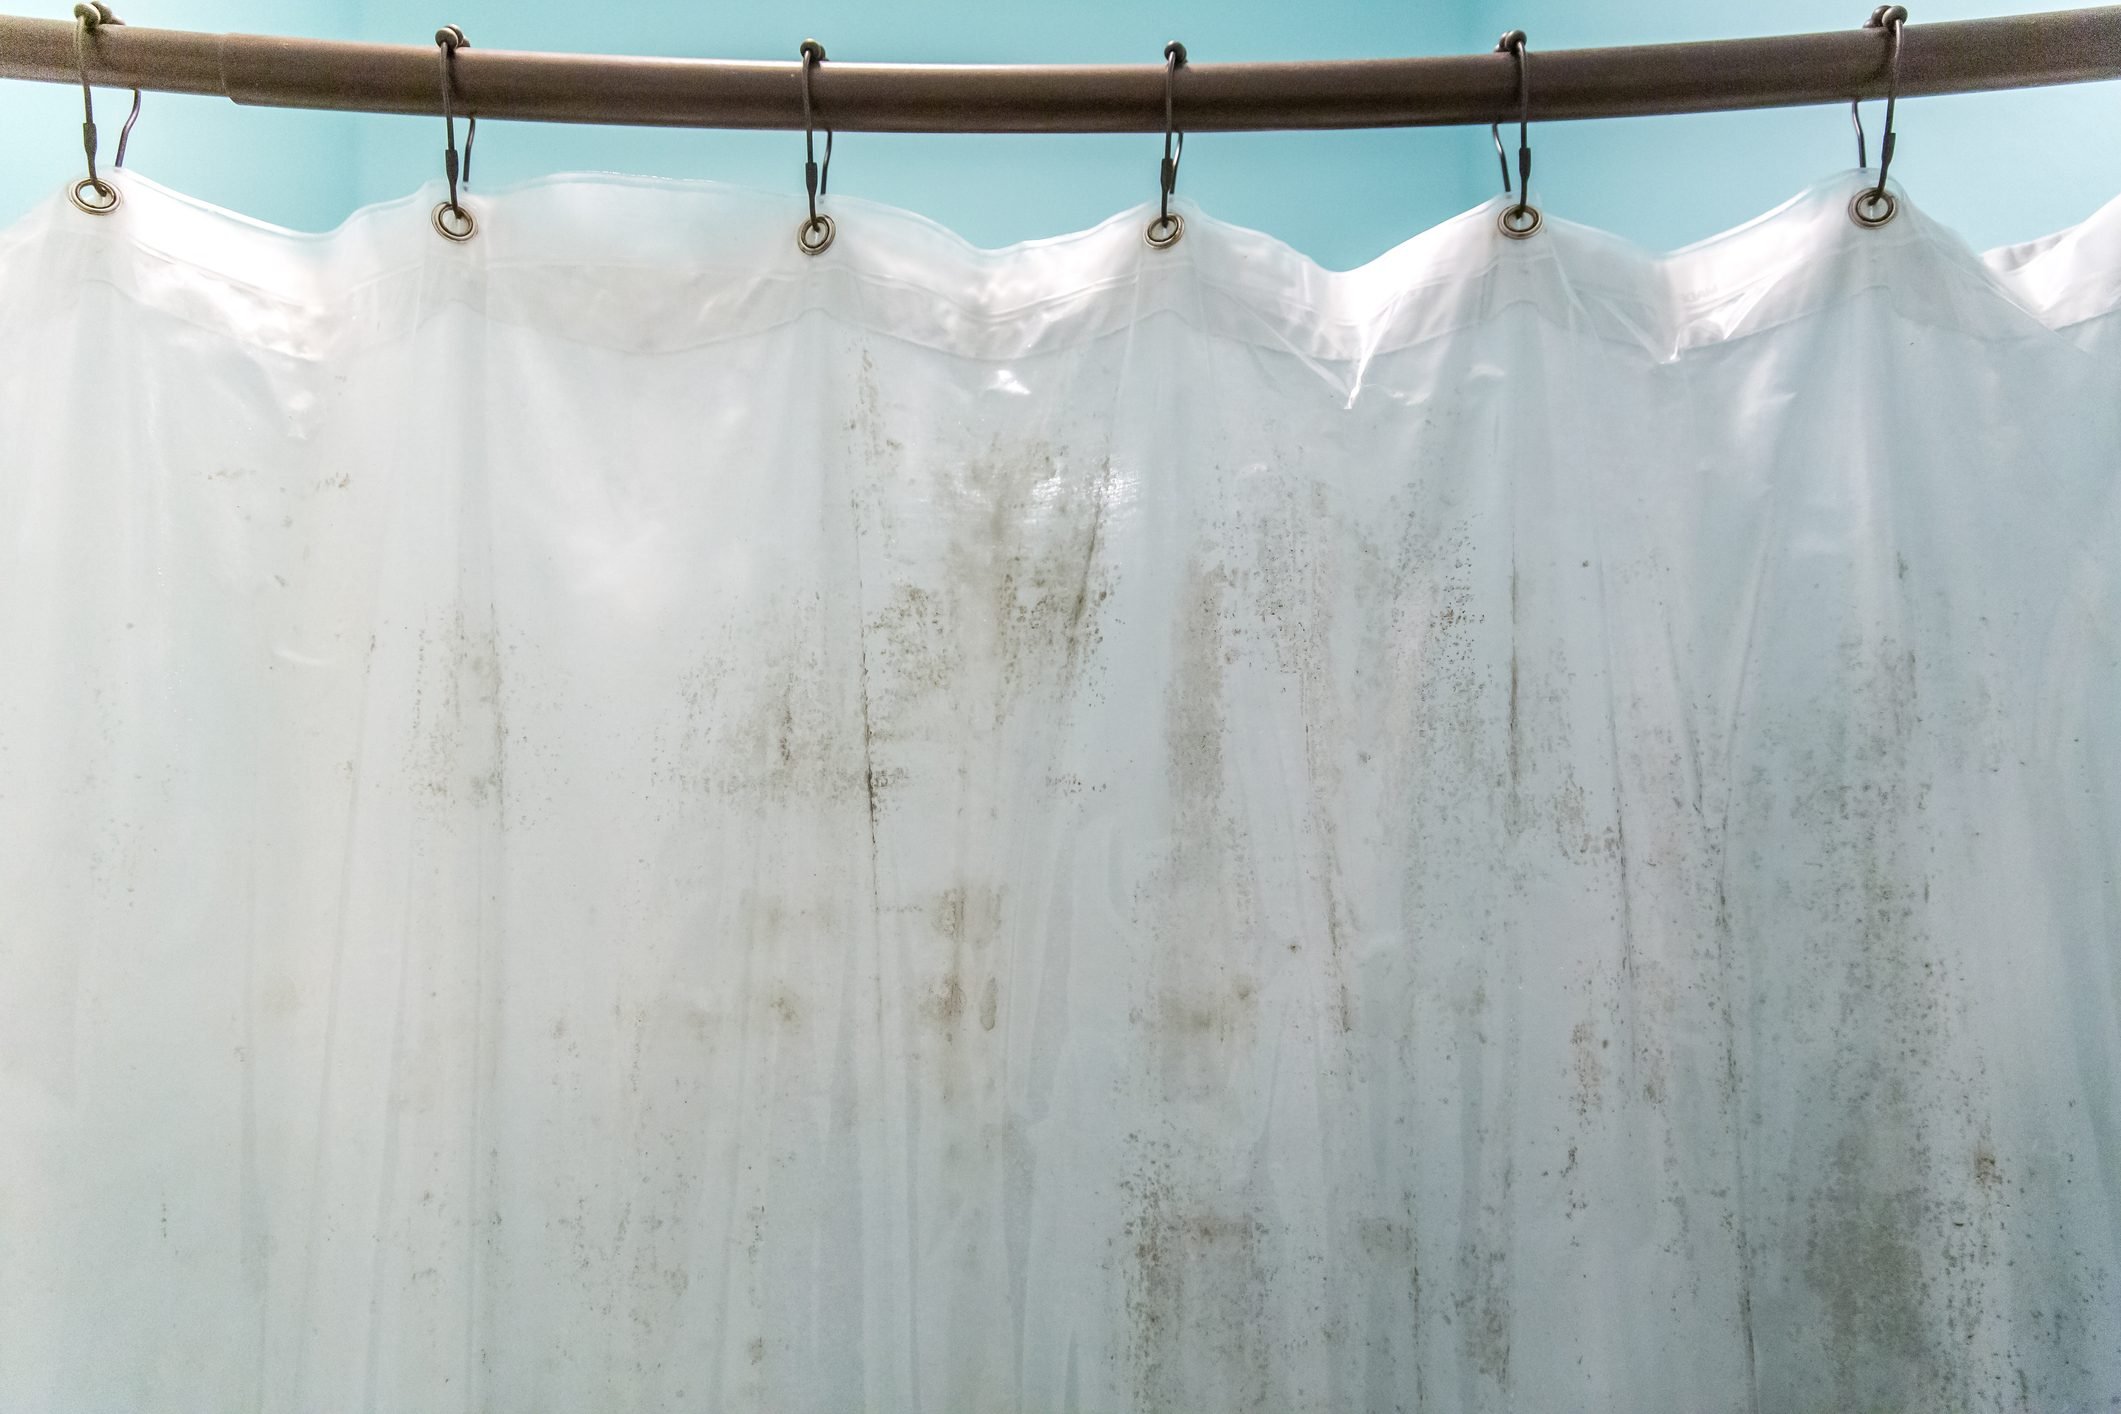 Homemade Cleaners for Shower Curtains